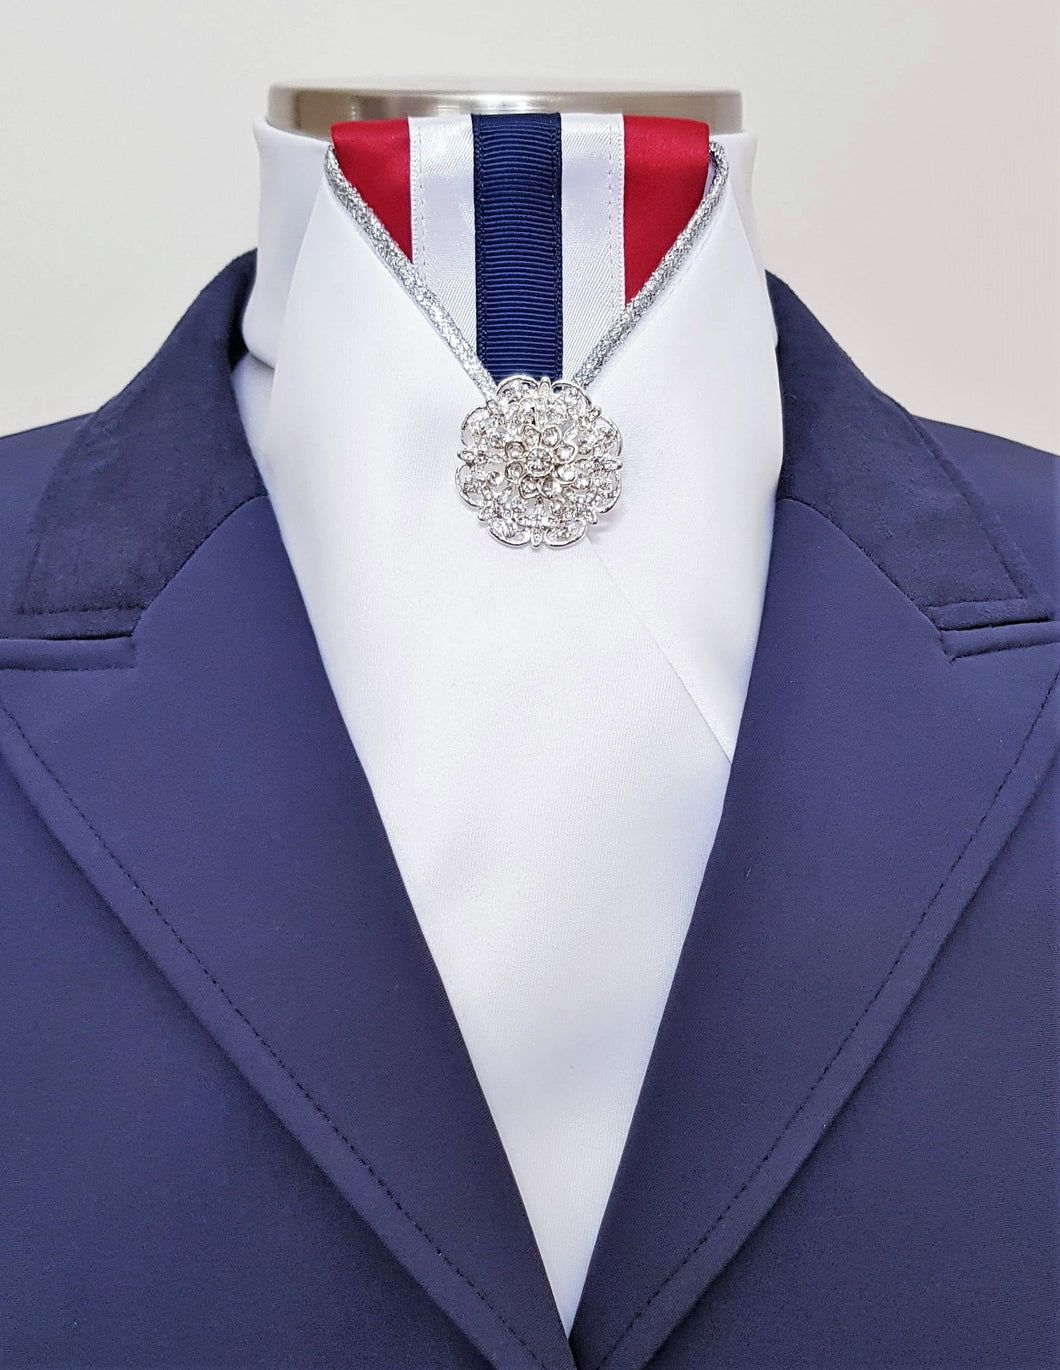 ERA LOTTA STOCK TIE - White satin, red, white & blue striped, silver piping and brooch